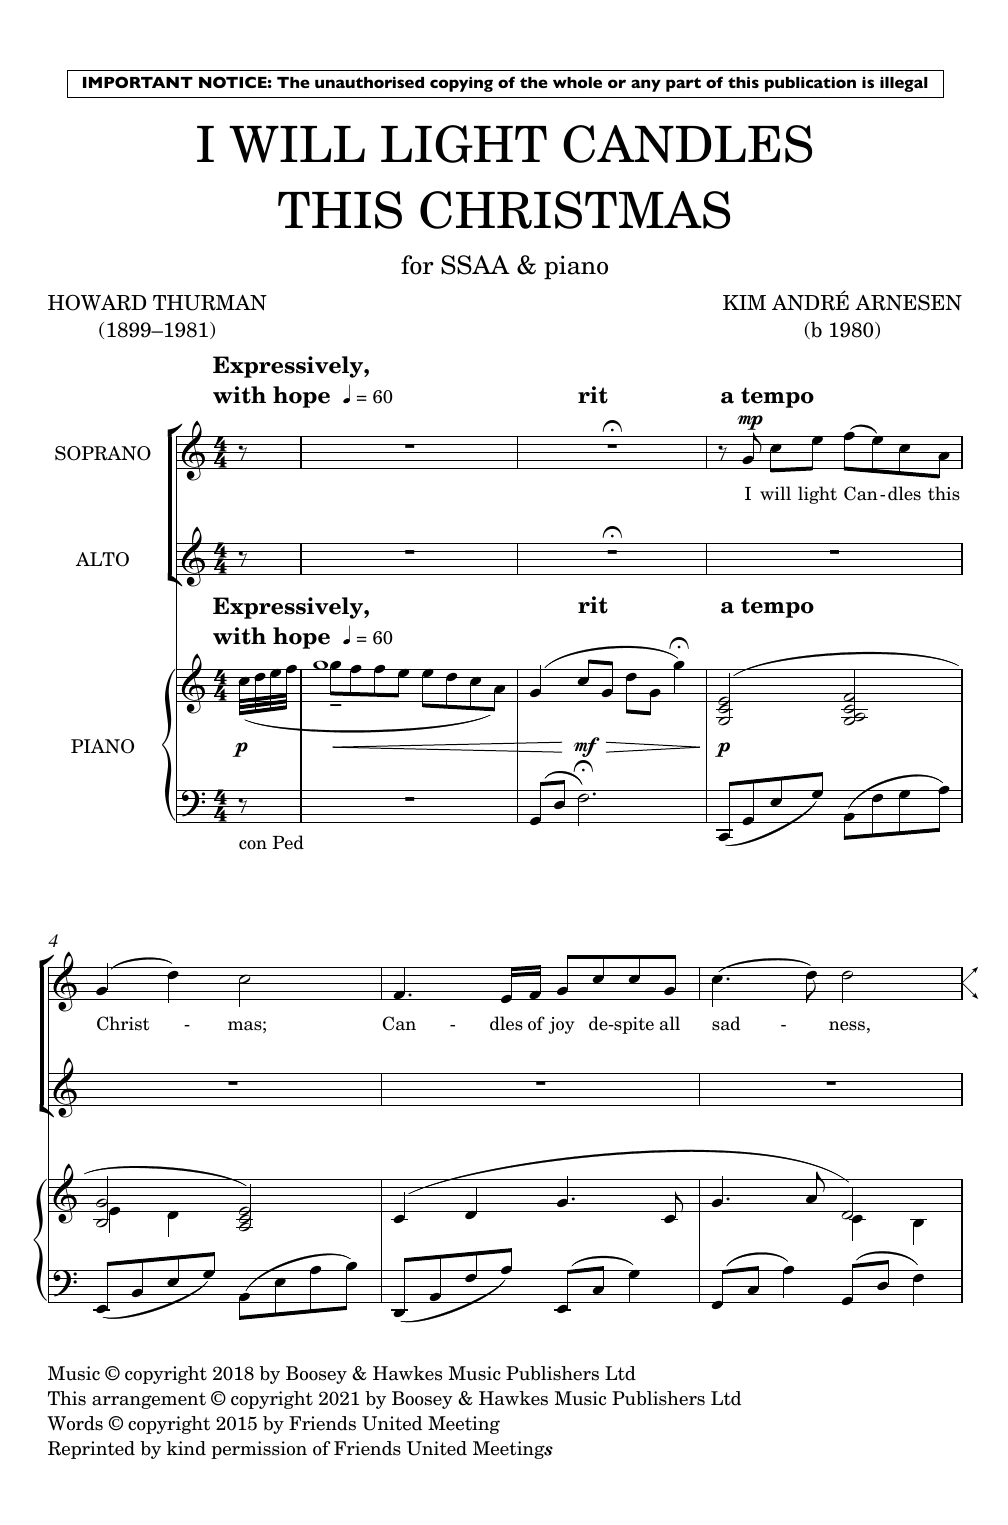 Download Kim Andre Arnesen I Will Light Candles This Christmas Sheet Music